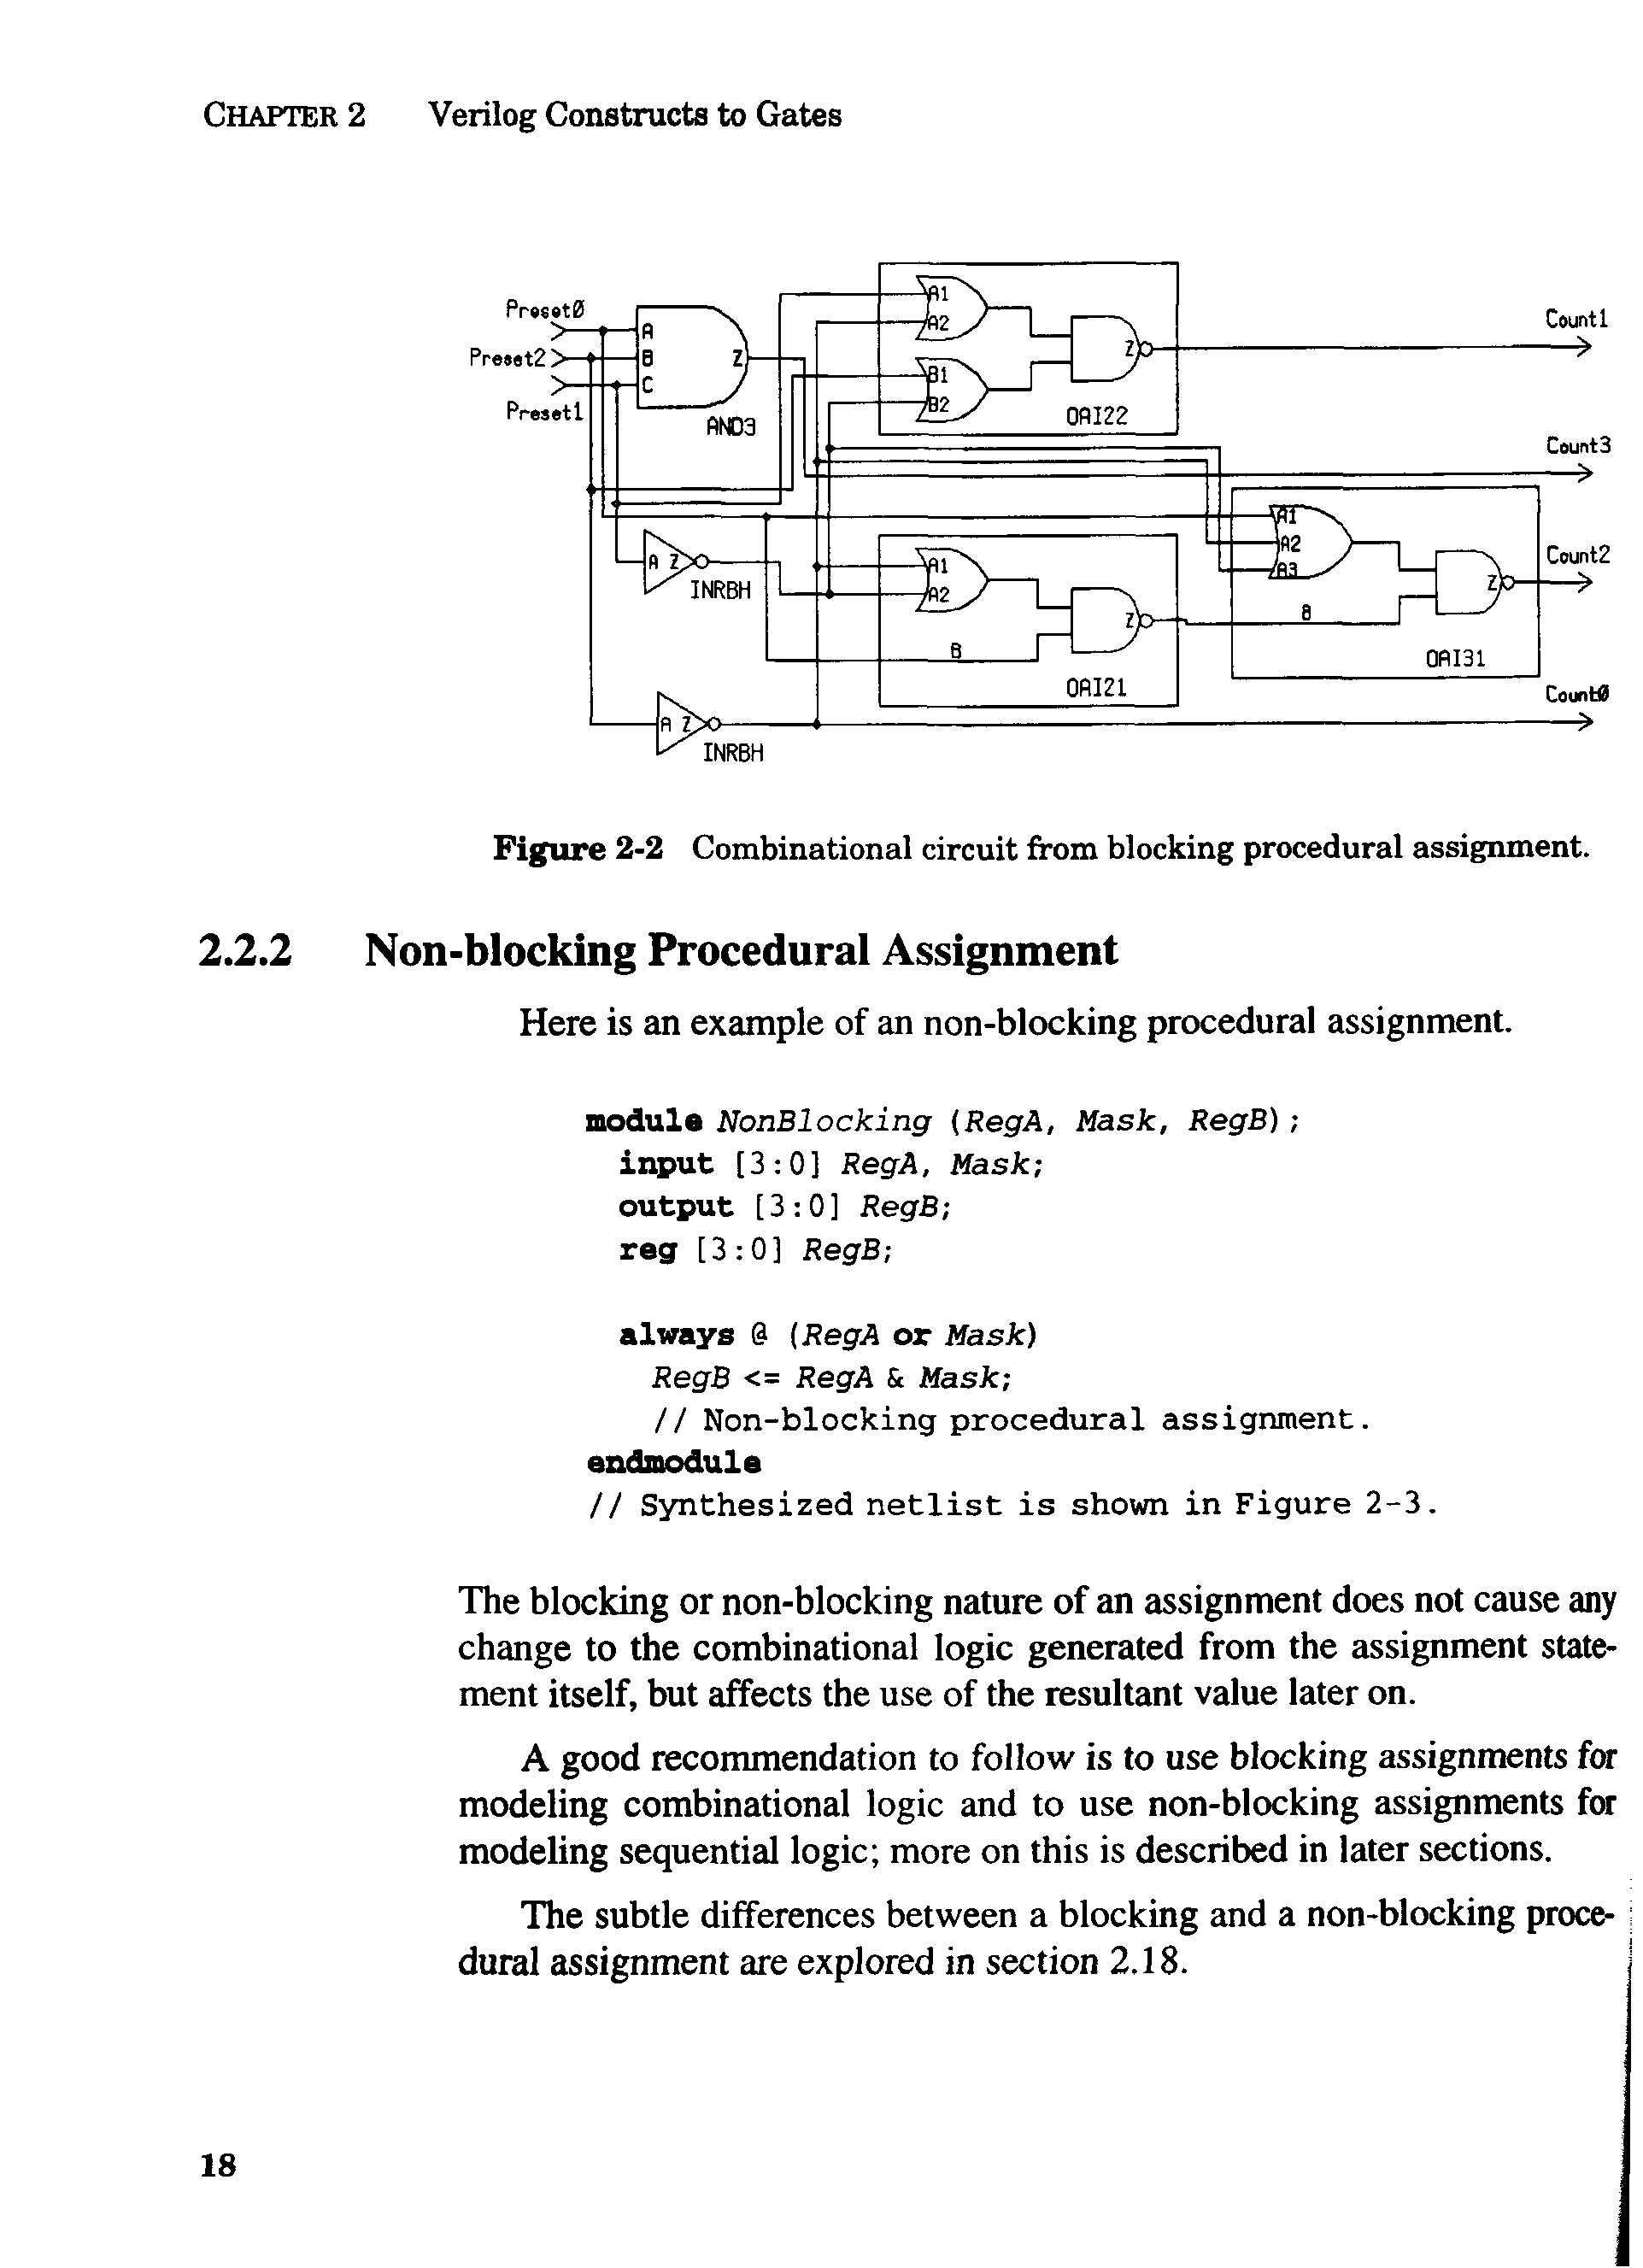 Figure 2-2 Combinational circuit from blocking procedural assignment.